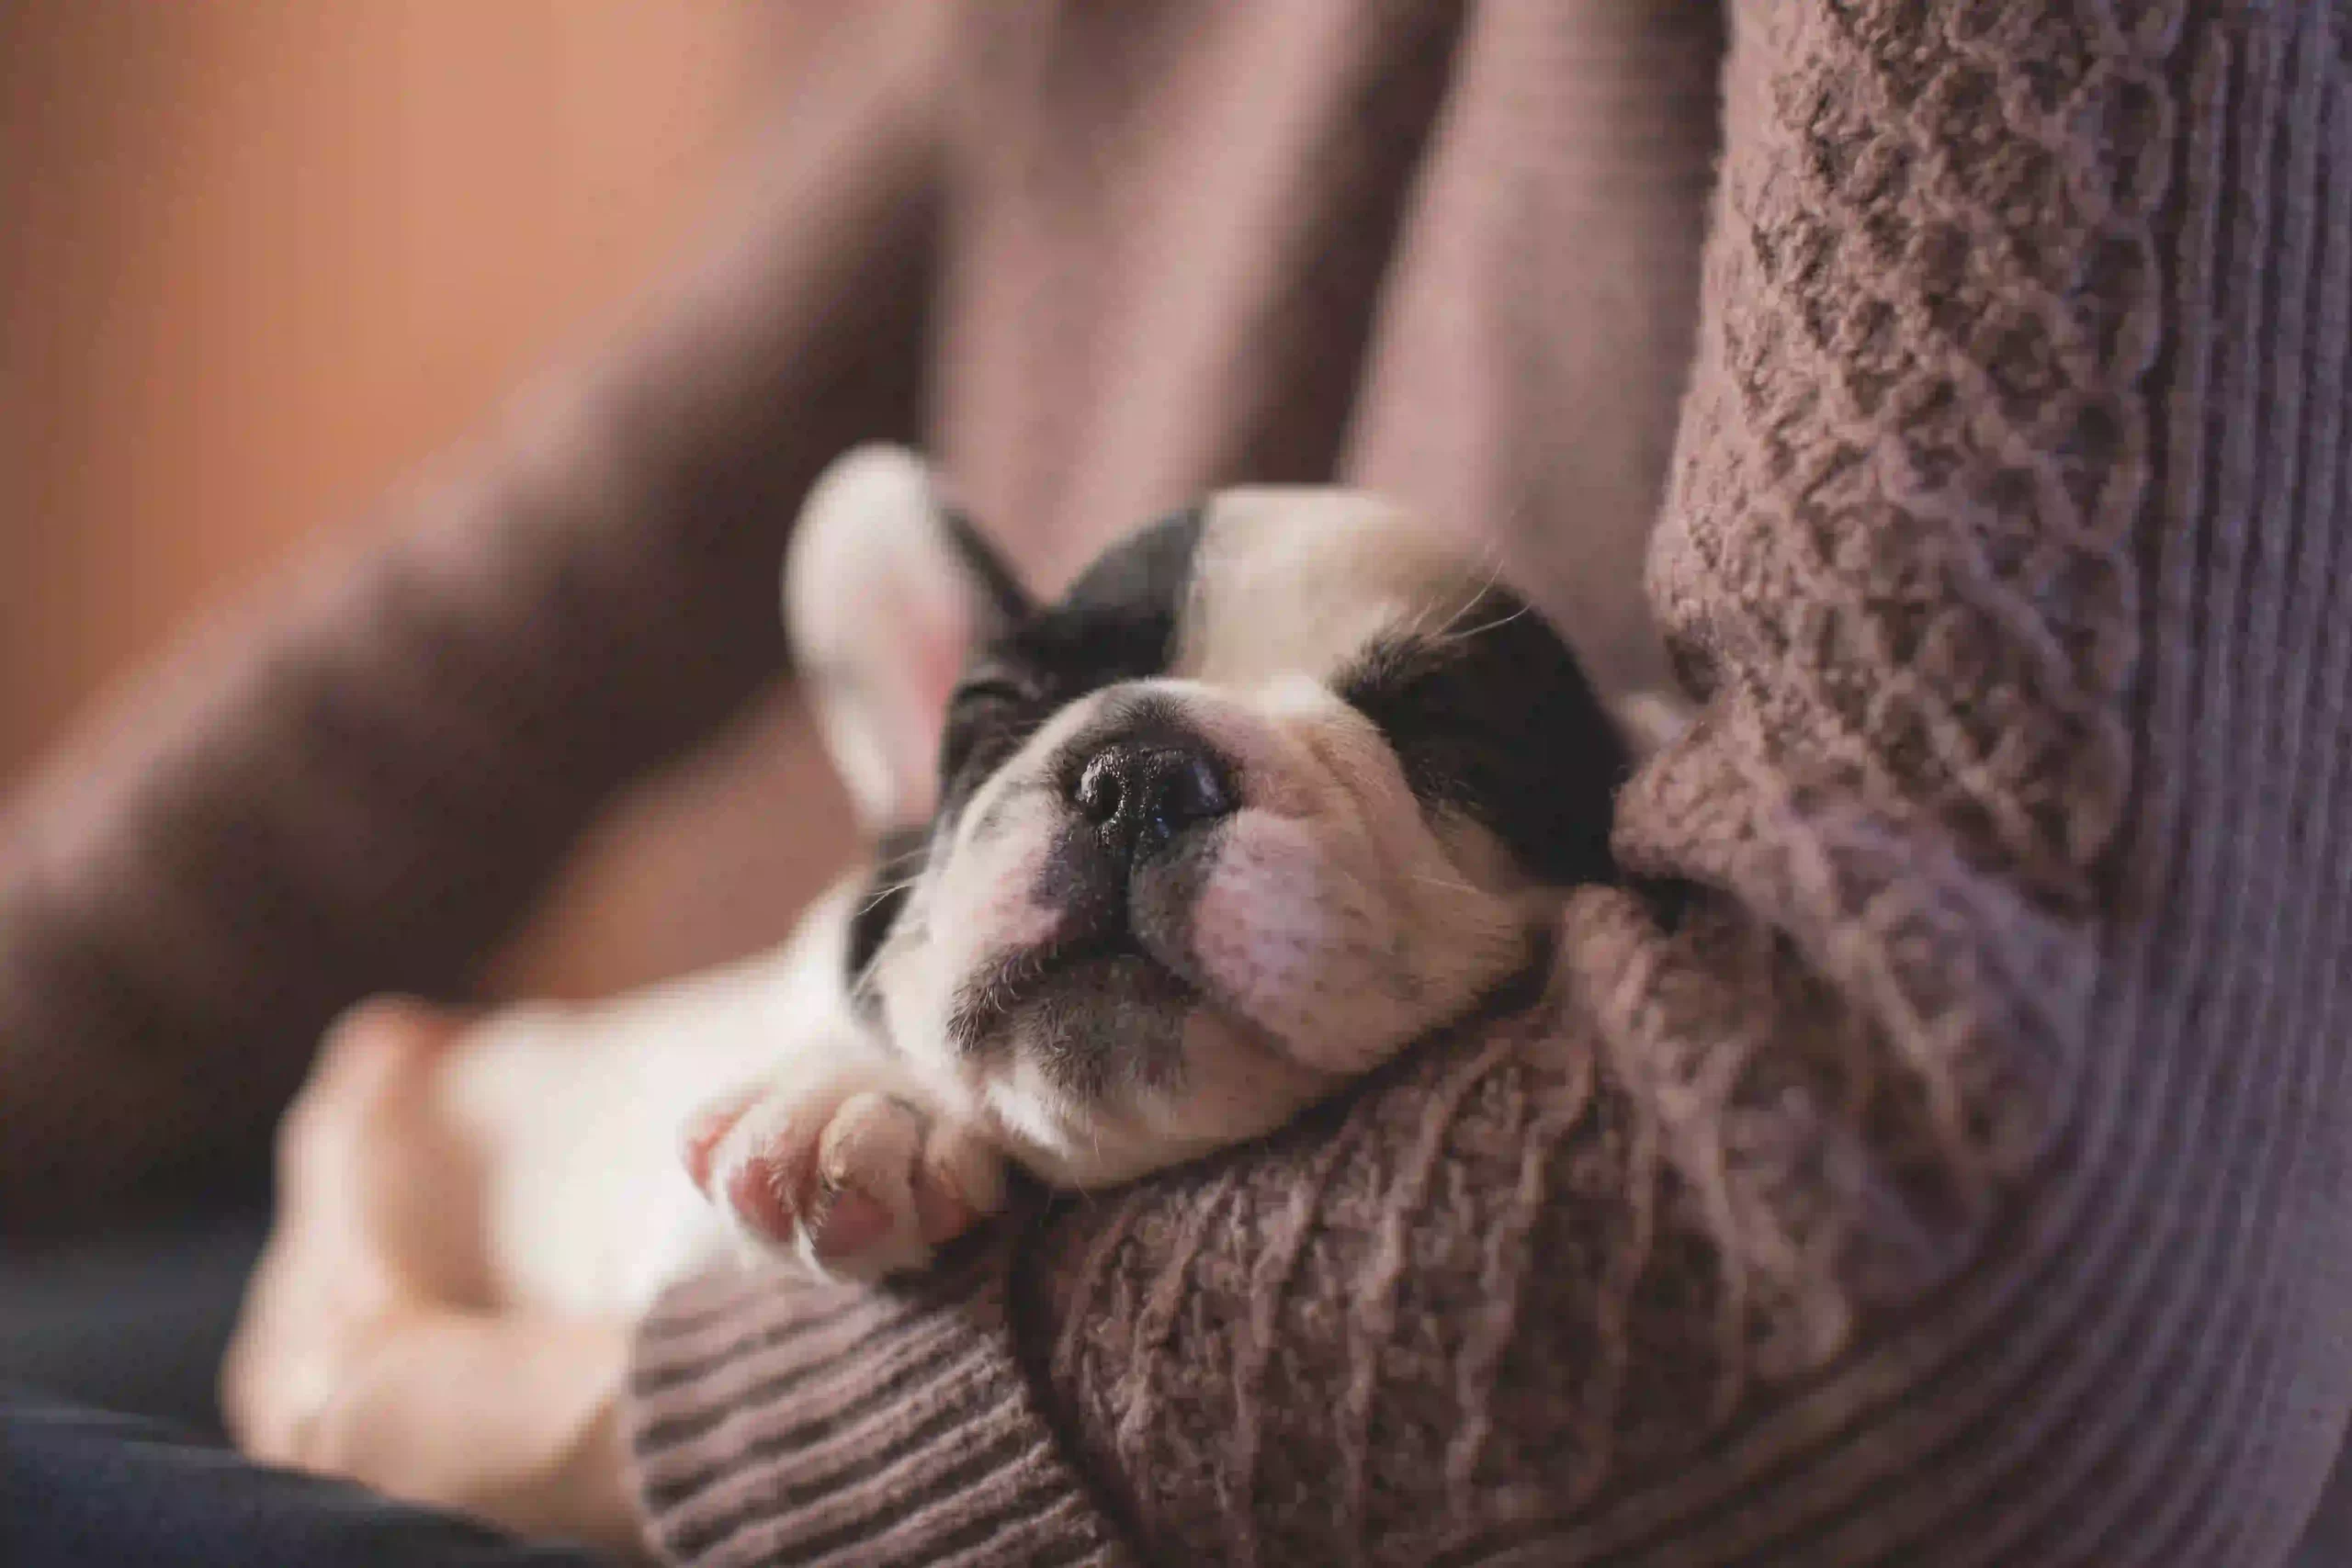  A person holding a small French bulldog puppy in their arms, the puppy is sleeping soundly against the person's chest.